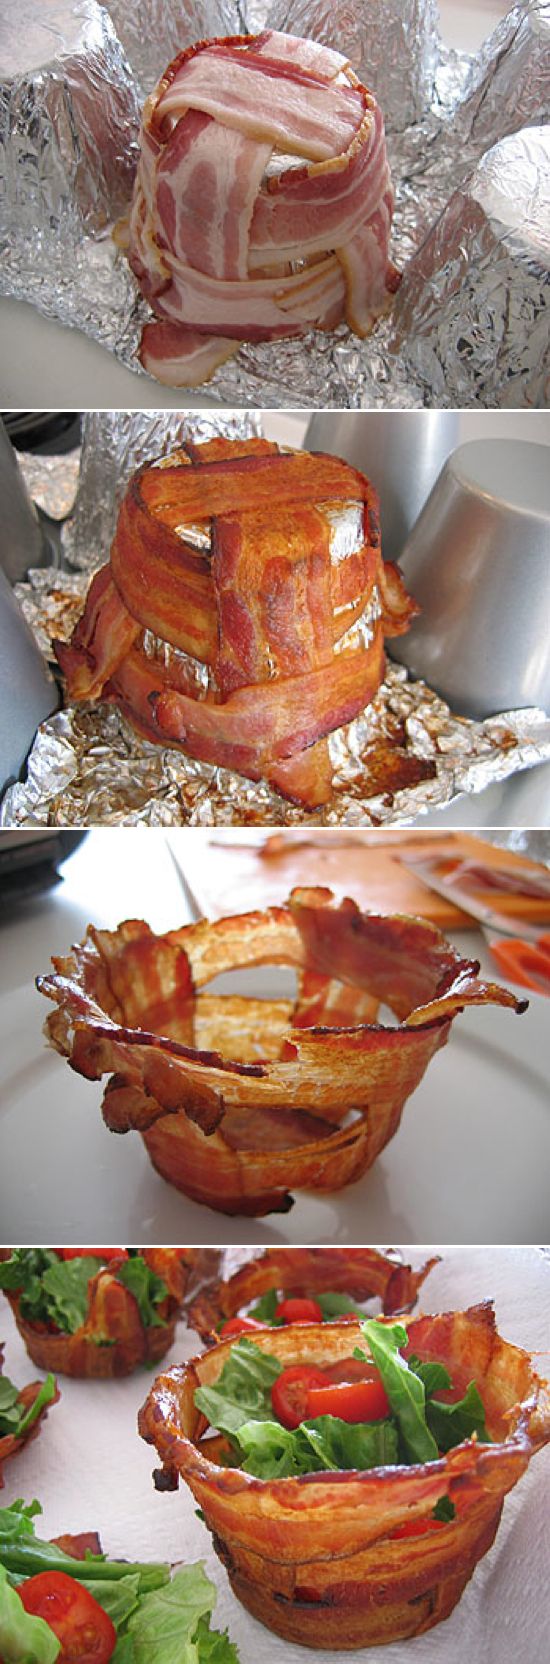 Bacon Cups for salad or mashed potatoes.. Yum!